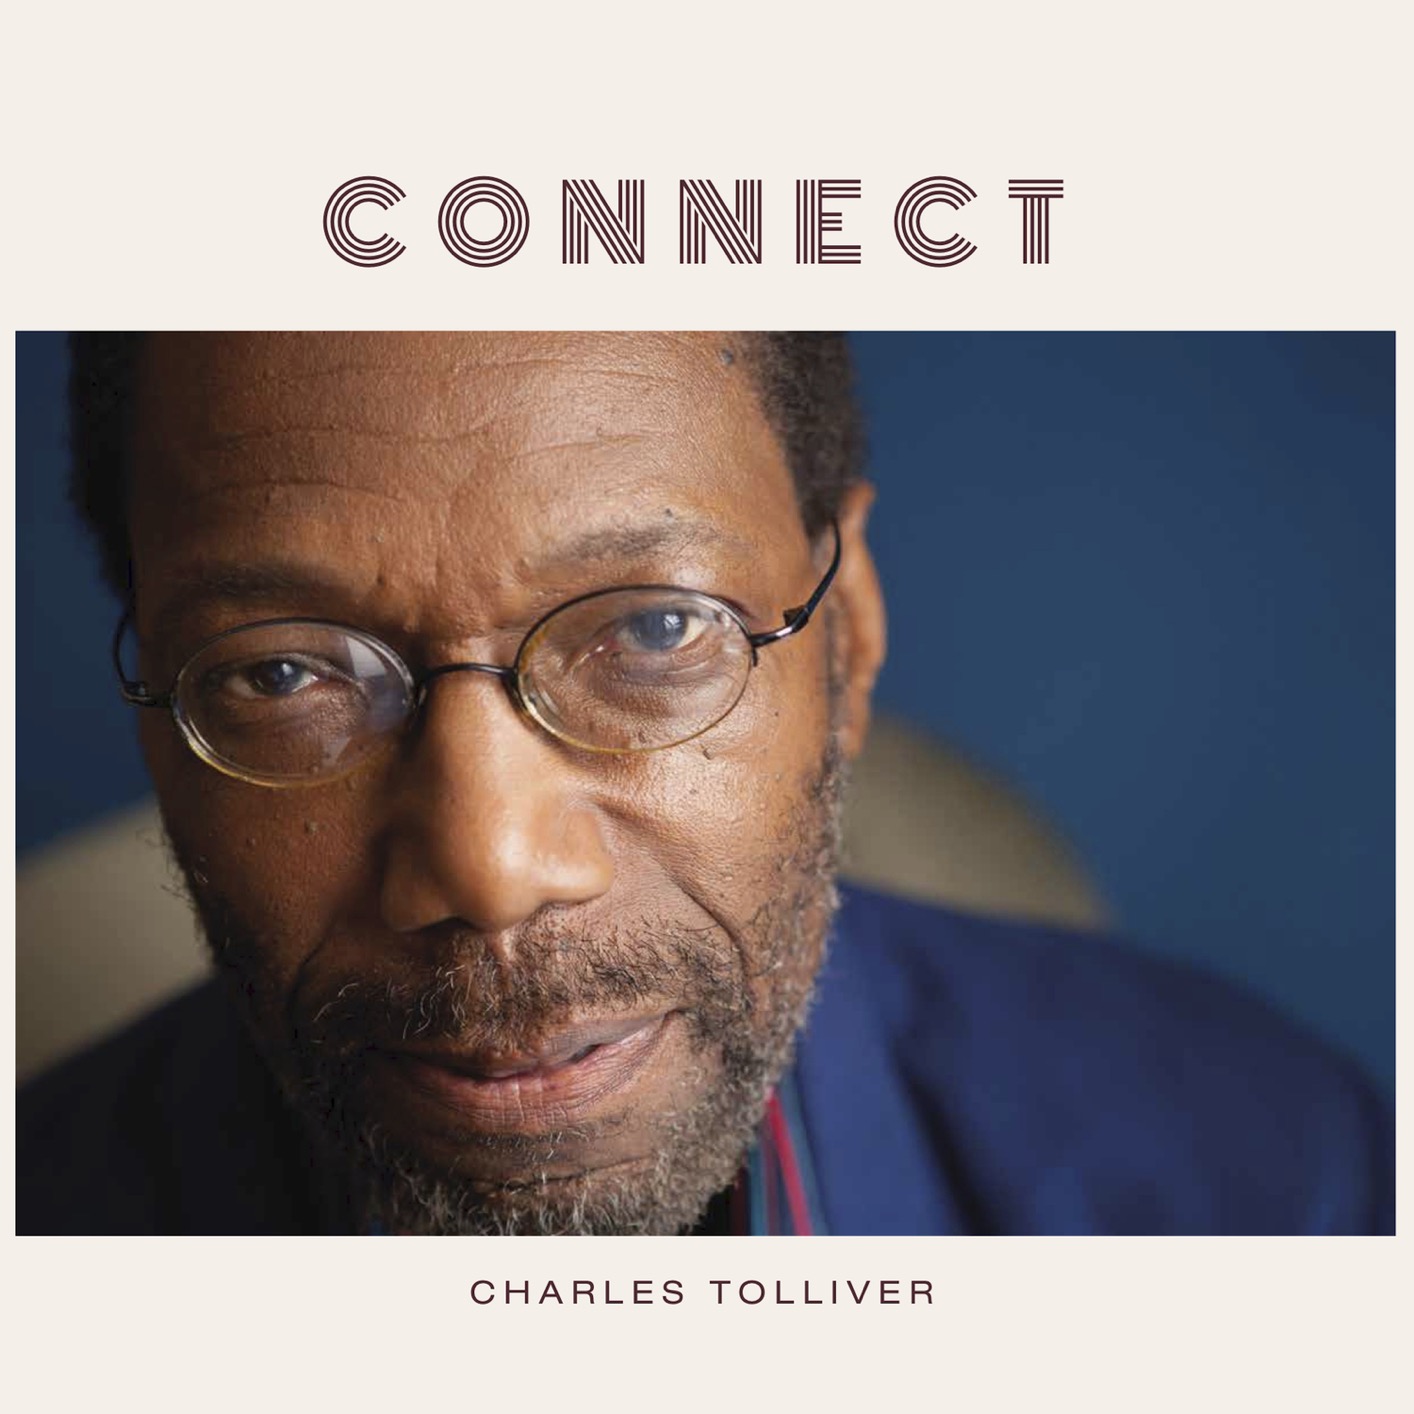 Charles Tolliver – Connect (2020) [FLAC 24bit/96kHz]